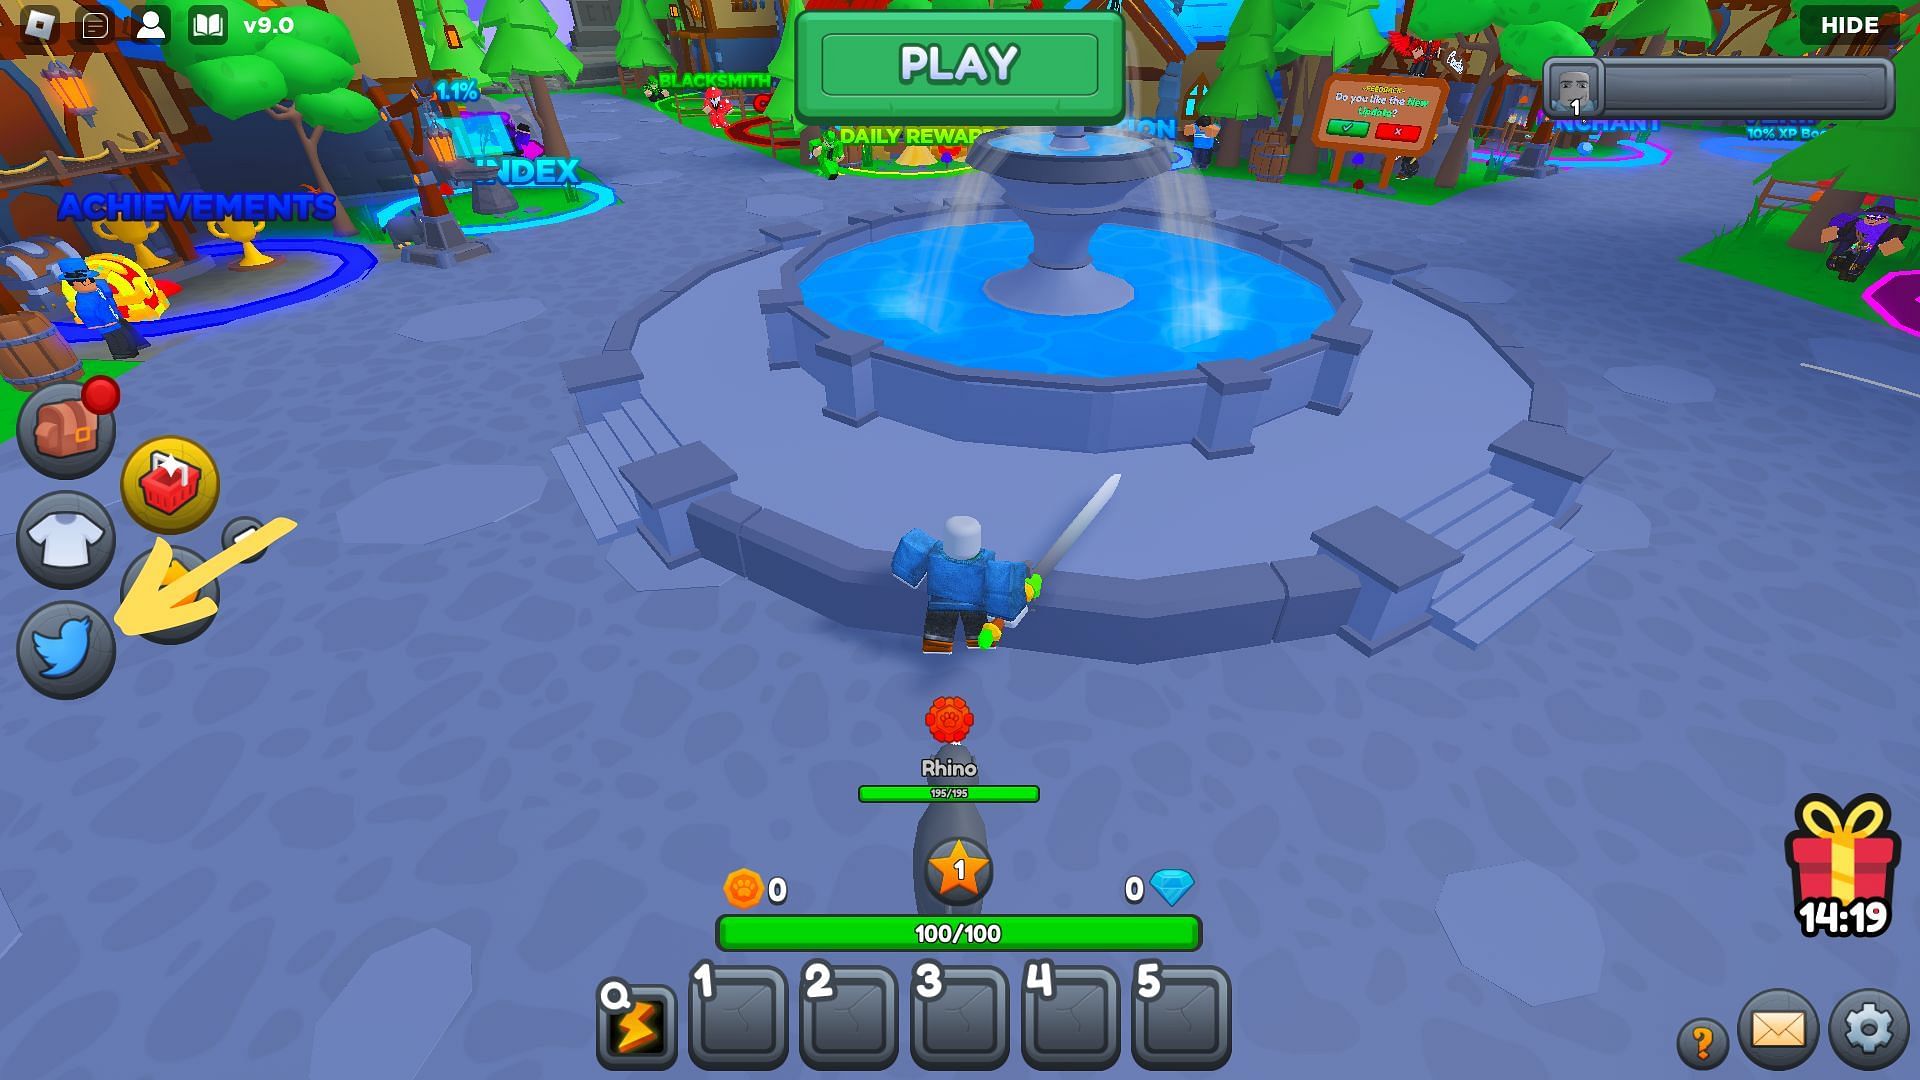 How to redeem codes for Pet Quest RPG (Image via Roblox and Sportskeeda)